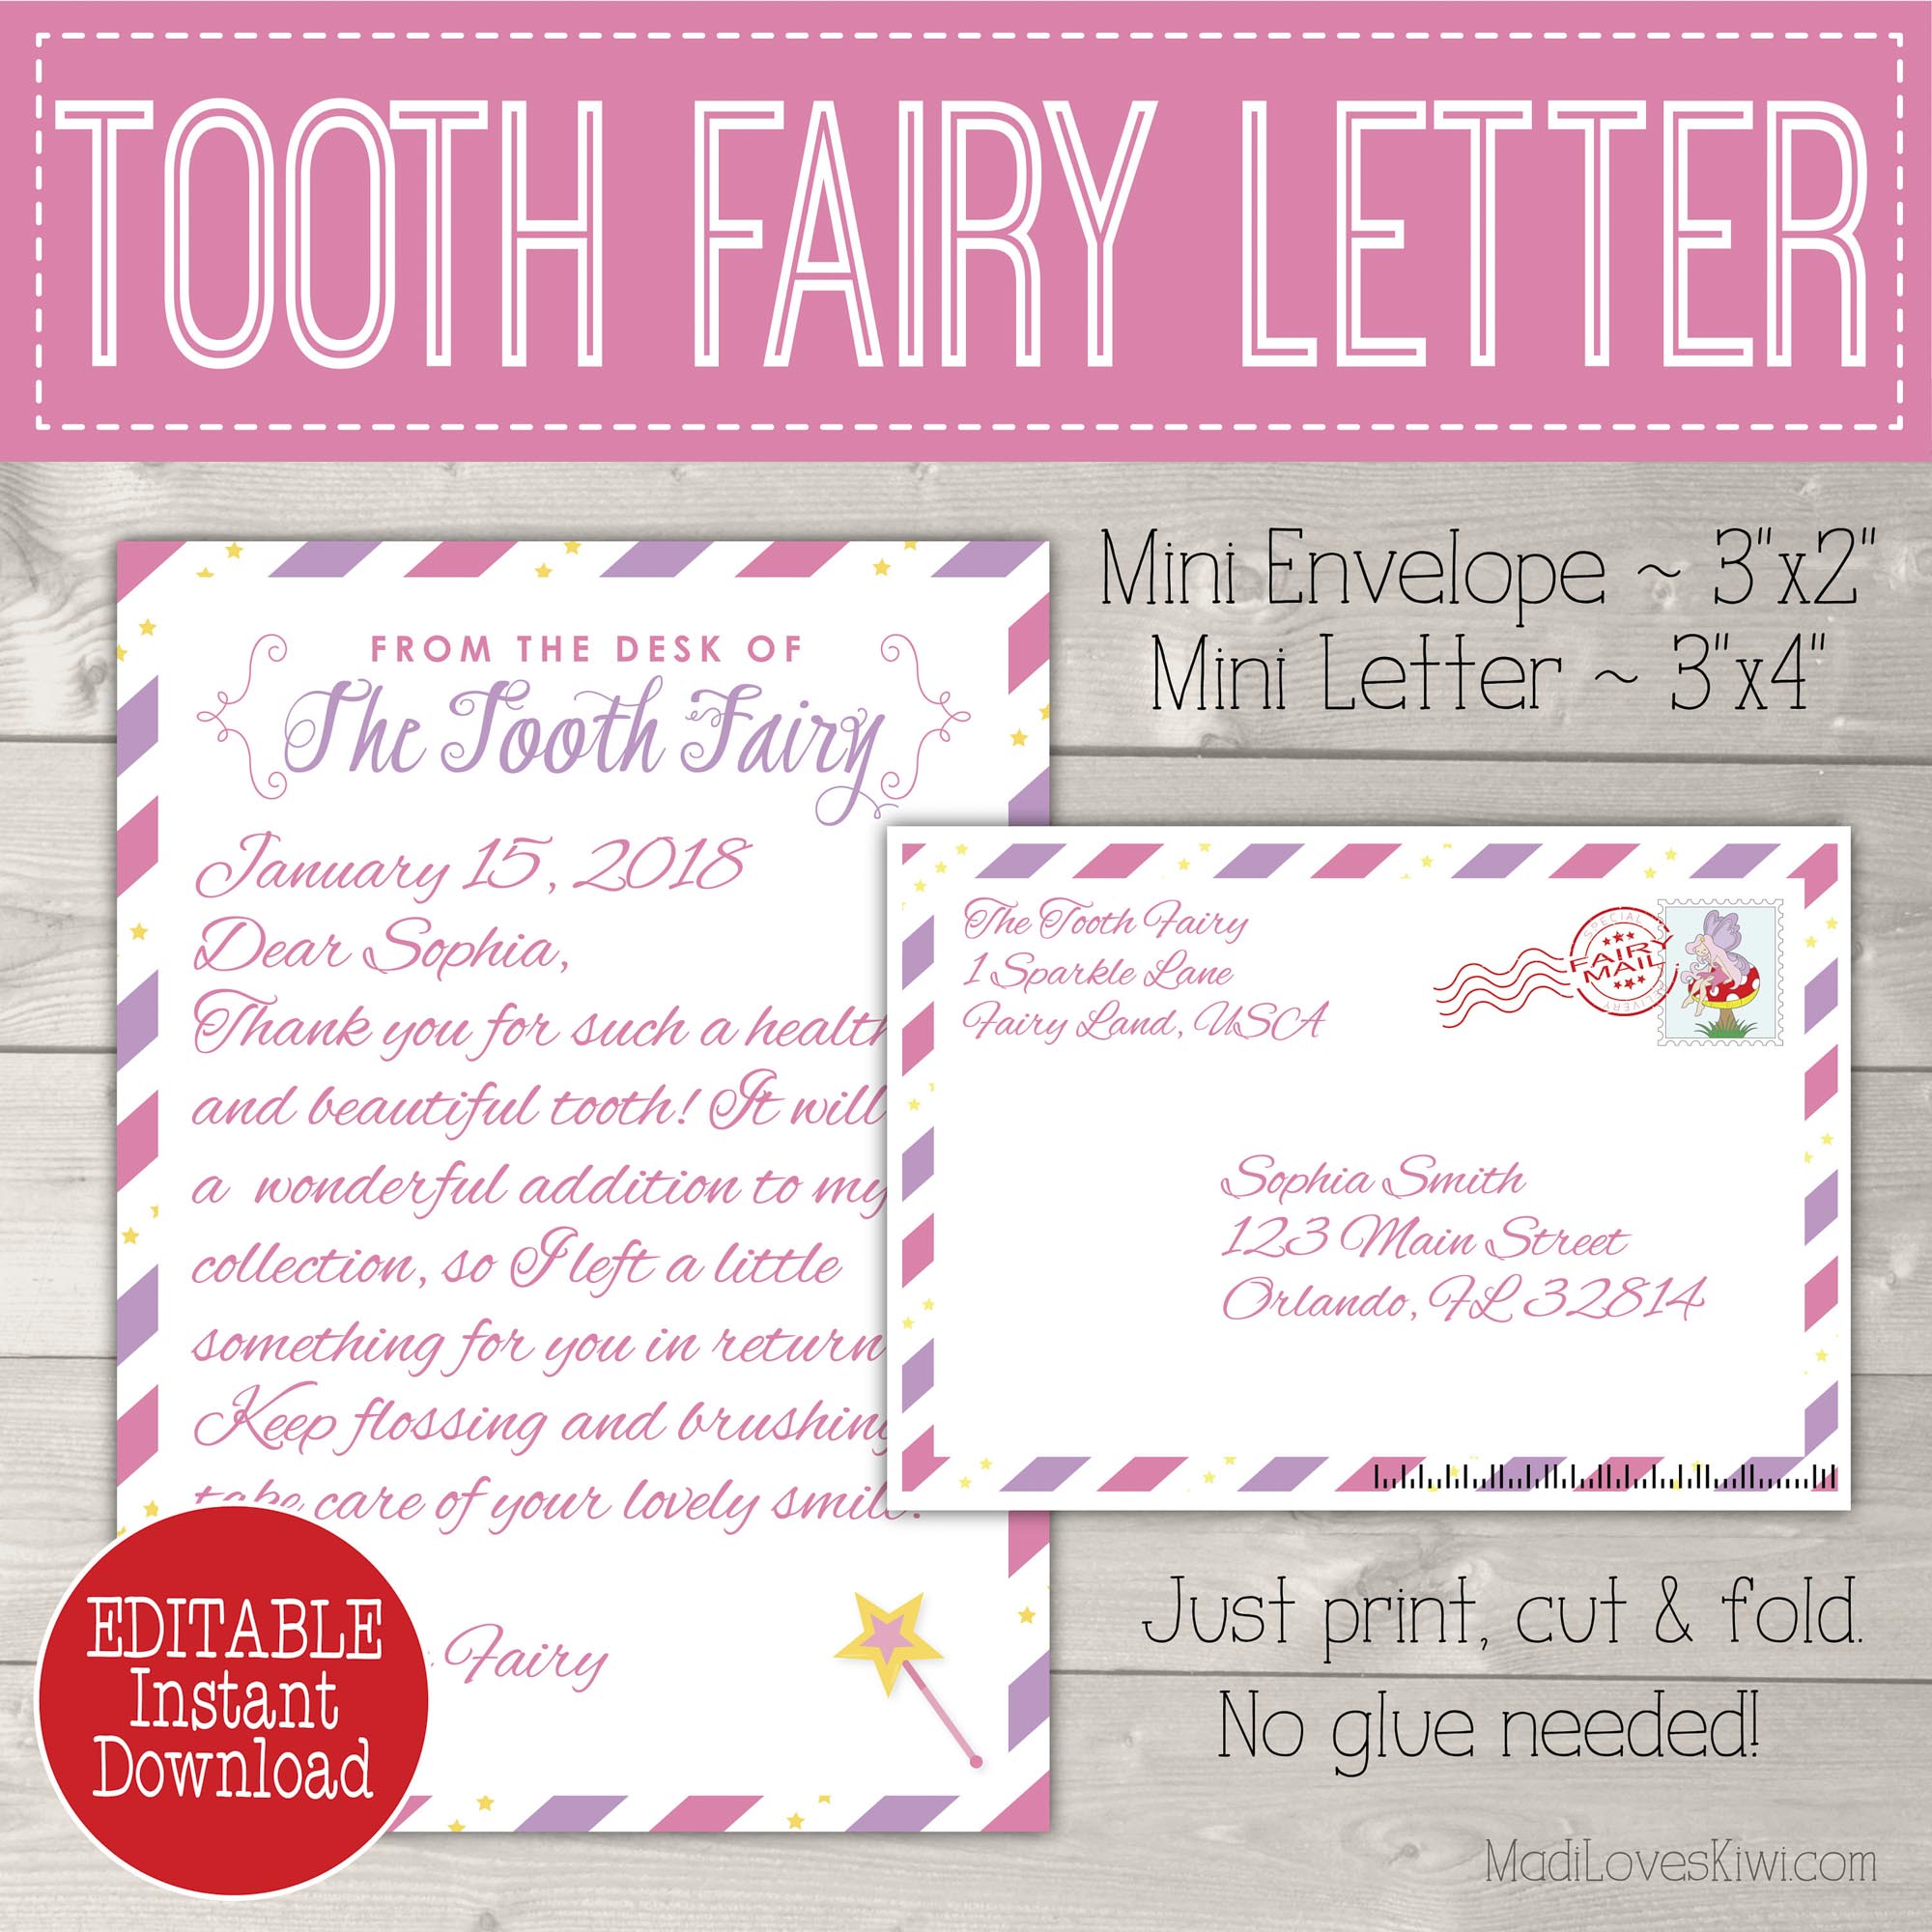 Free Printable Tooth Fairy Letter And Envelope Printable Blog